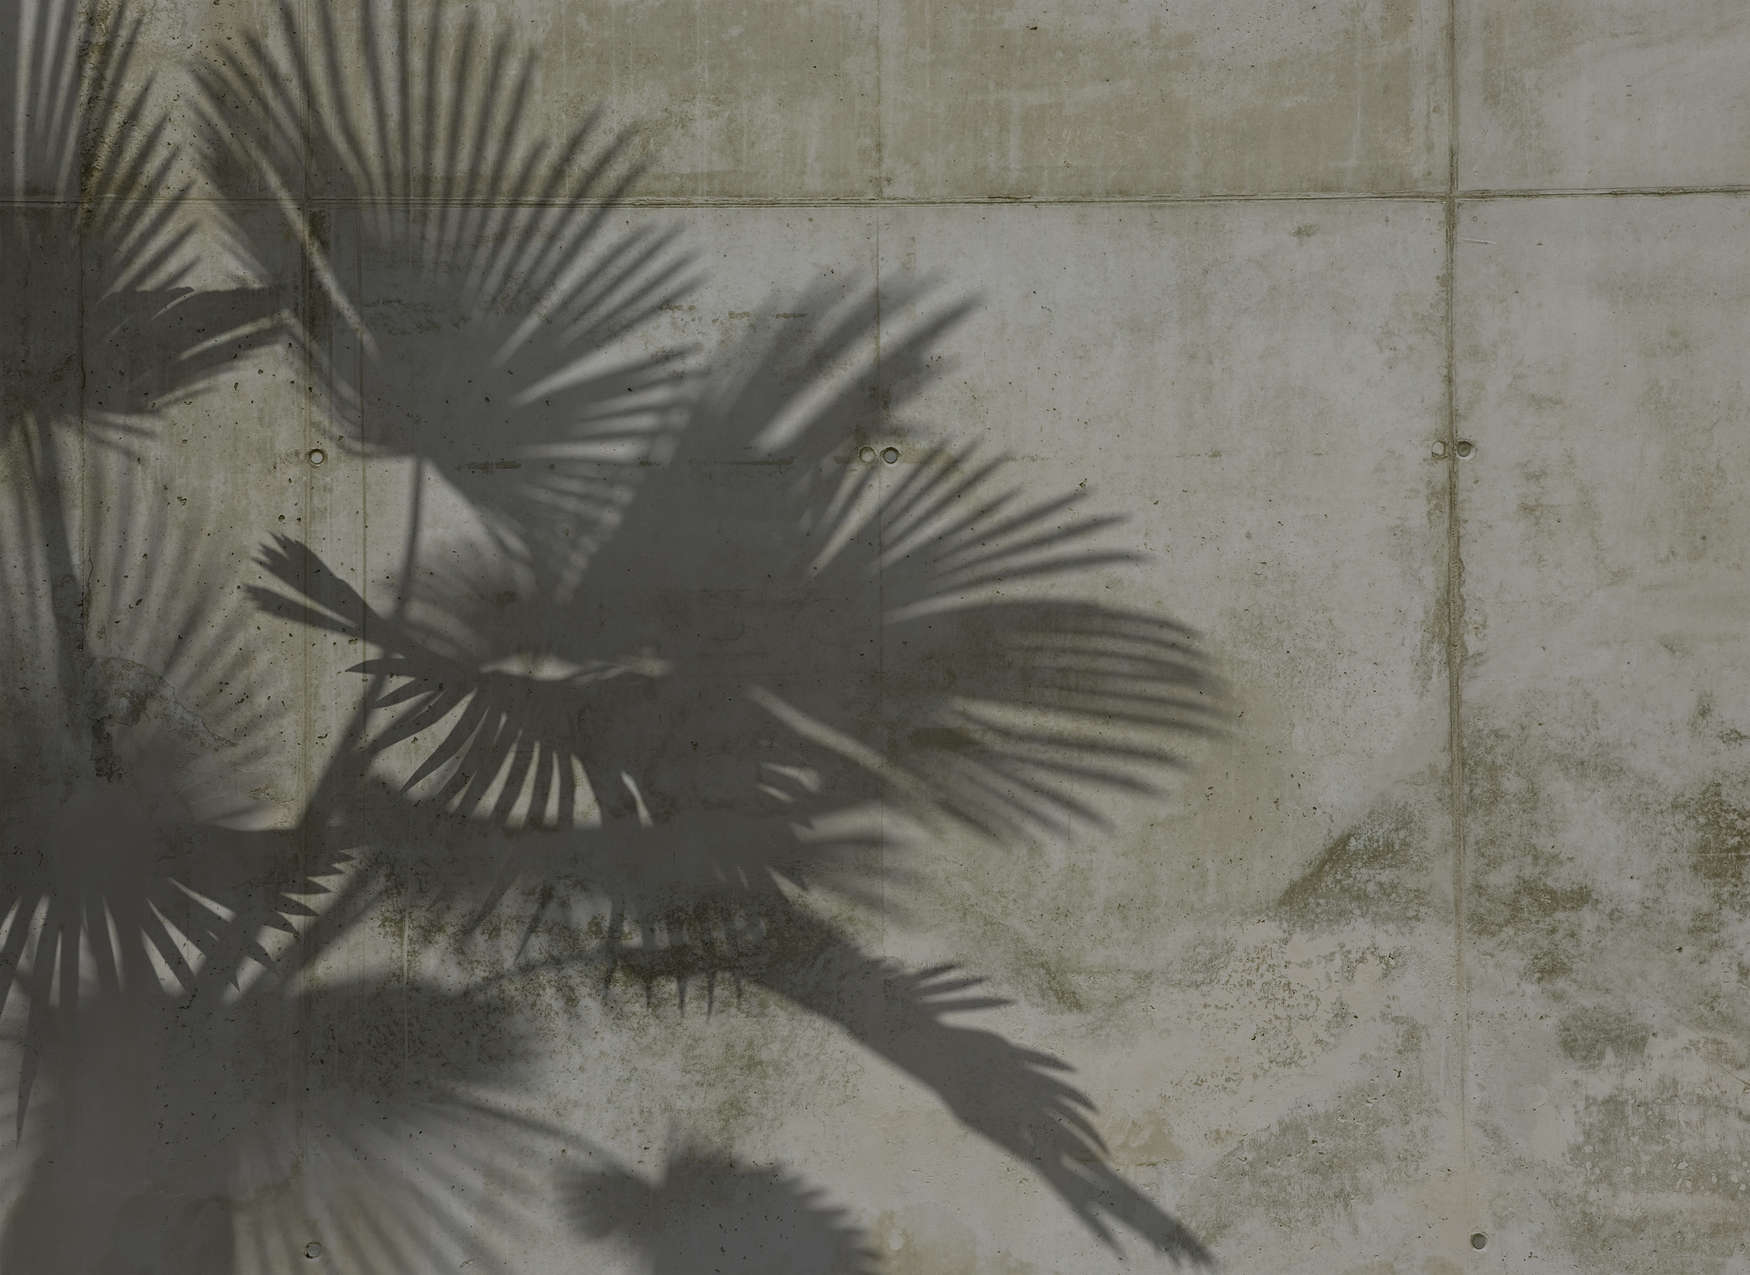             Photo wallpaper Shadows of Palm Leaves on Concrete Wall - Grey
        